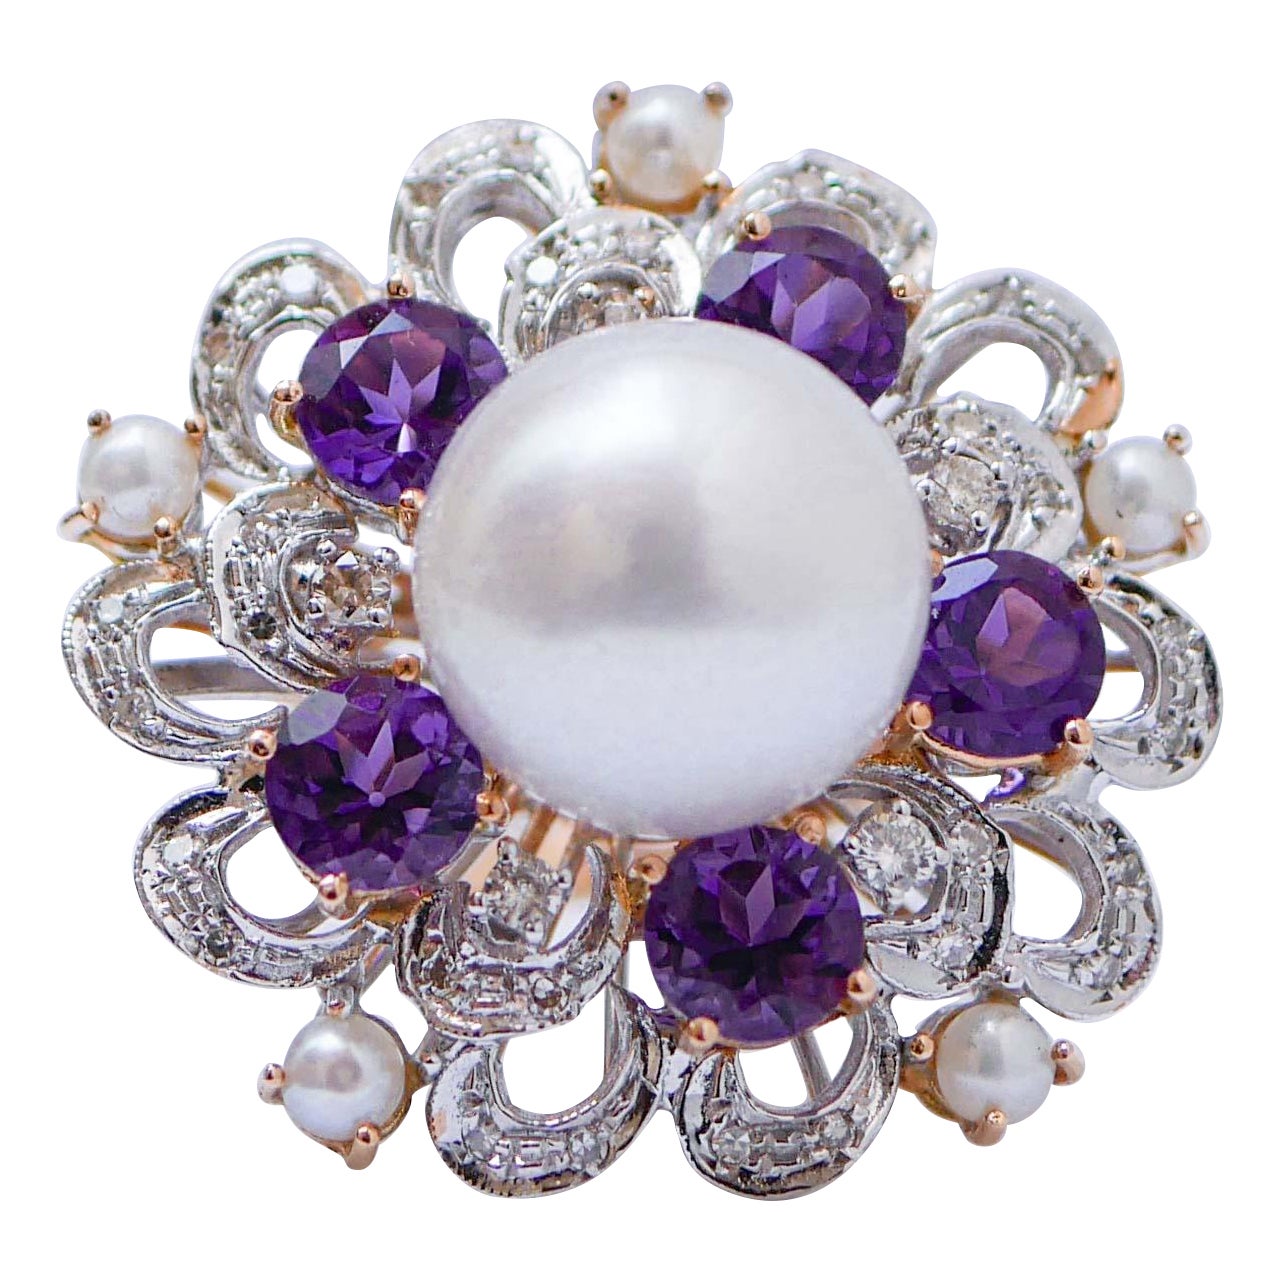 South-Sea Pearl, Diamonds, Amethysts, Pearls, 14Kt Rose Gold and White Gold Ring For Sale